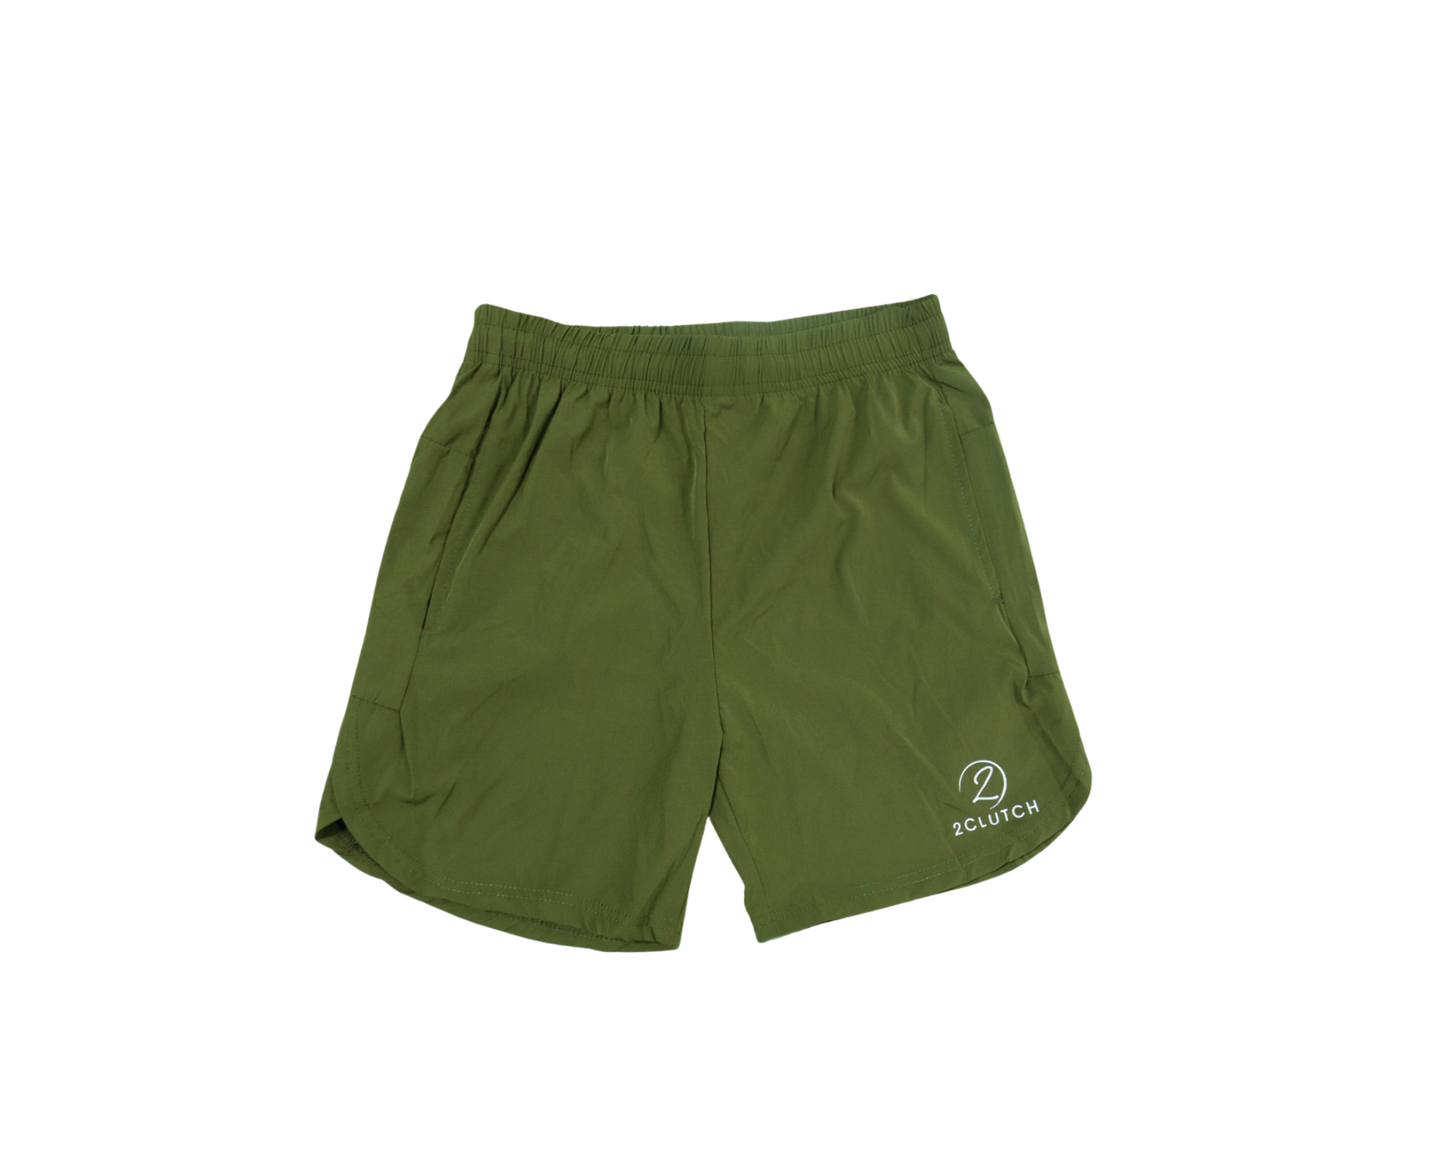 Dry-Fit 7'' Shorts